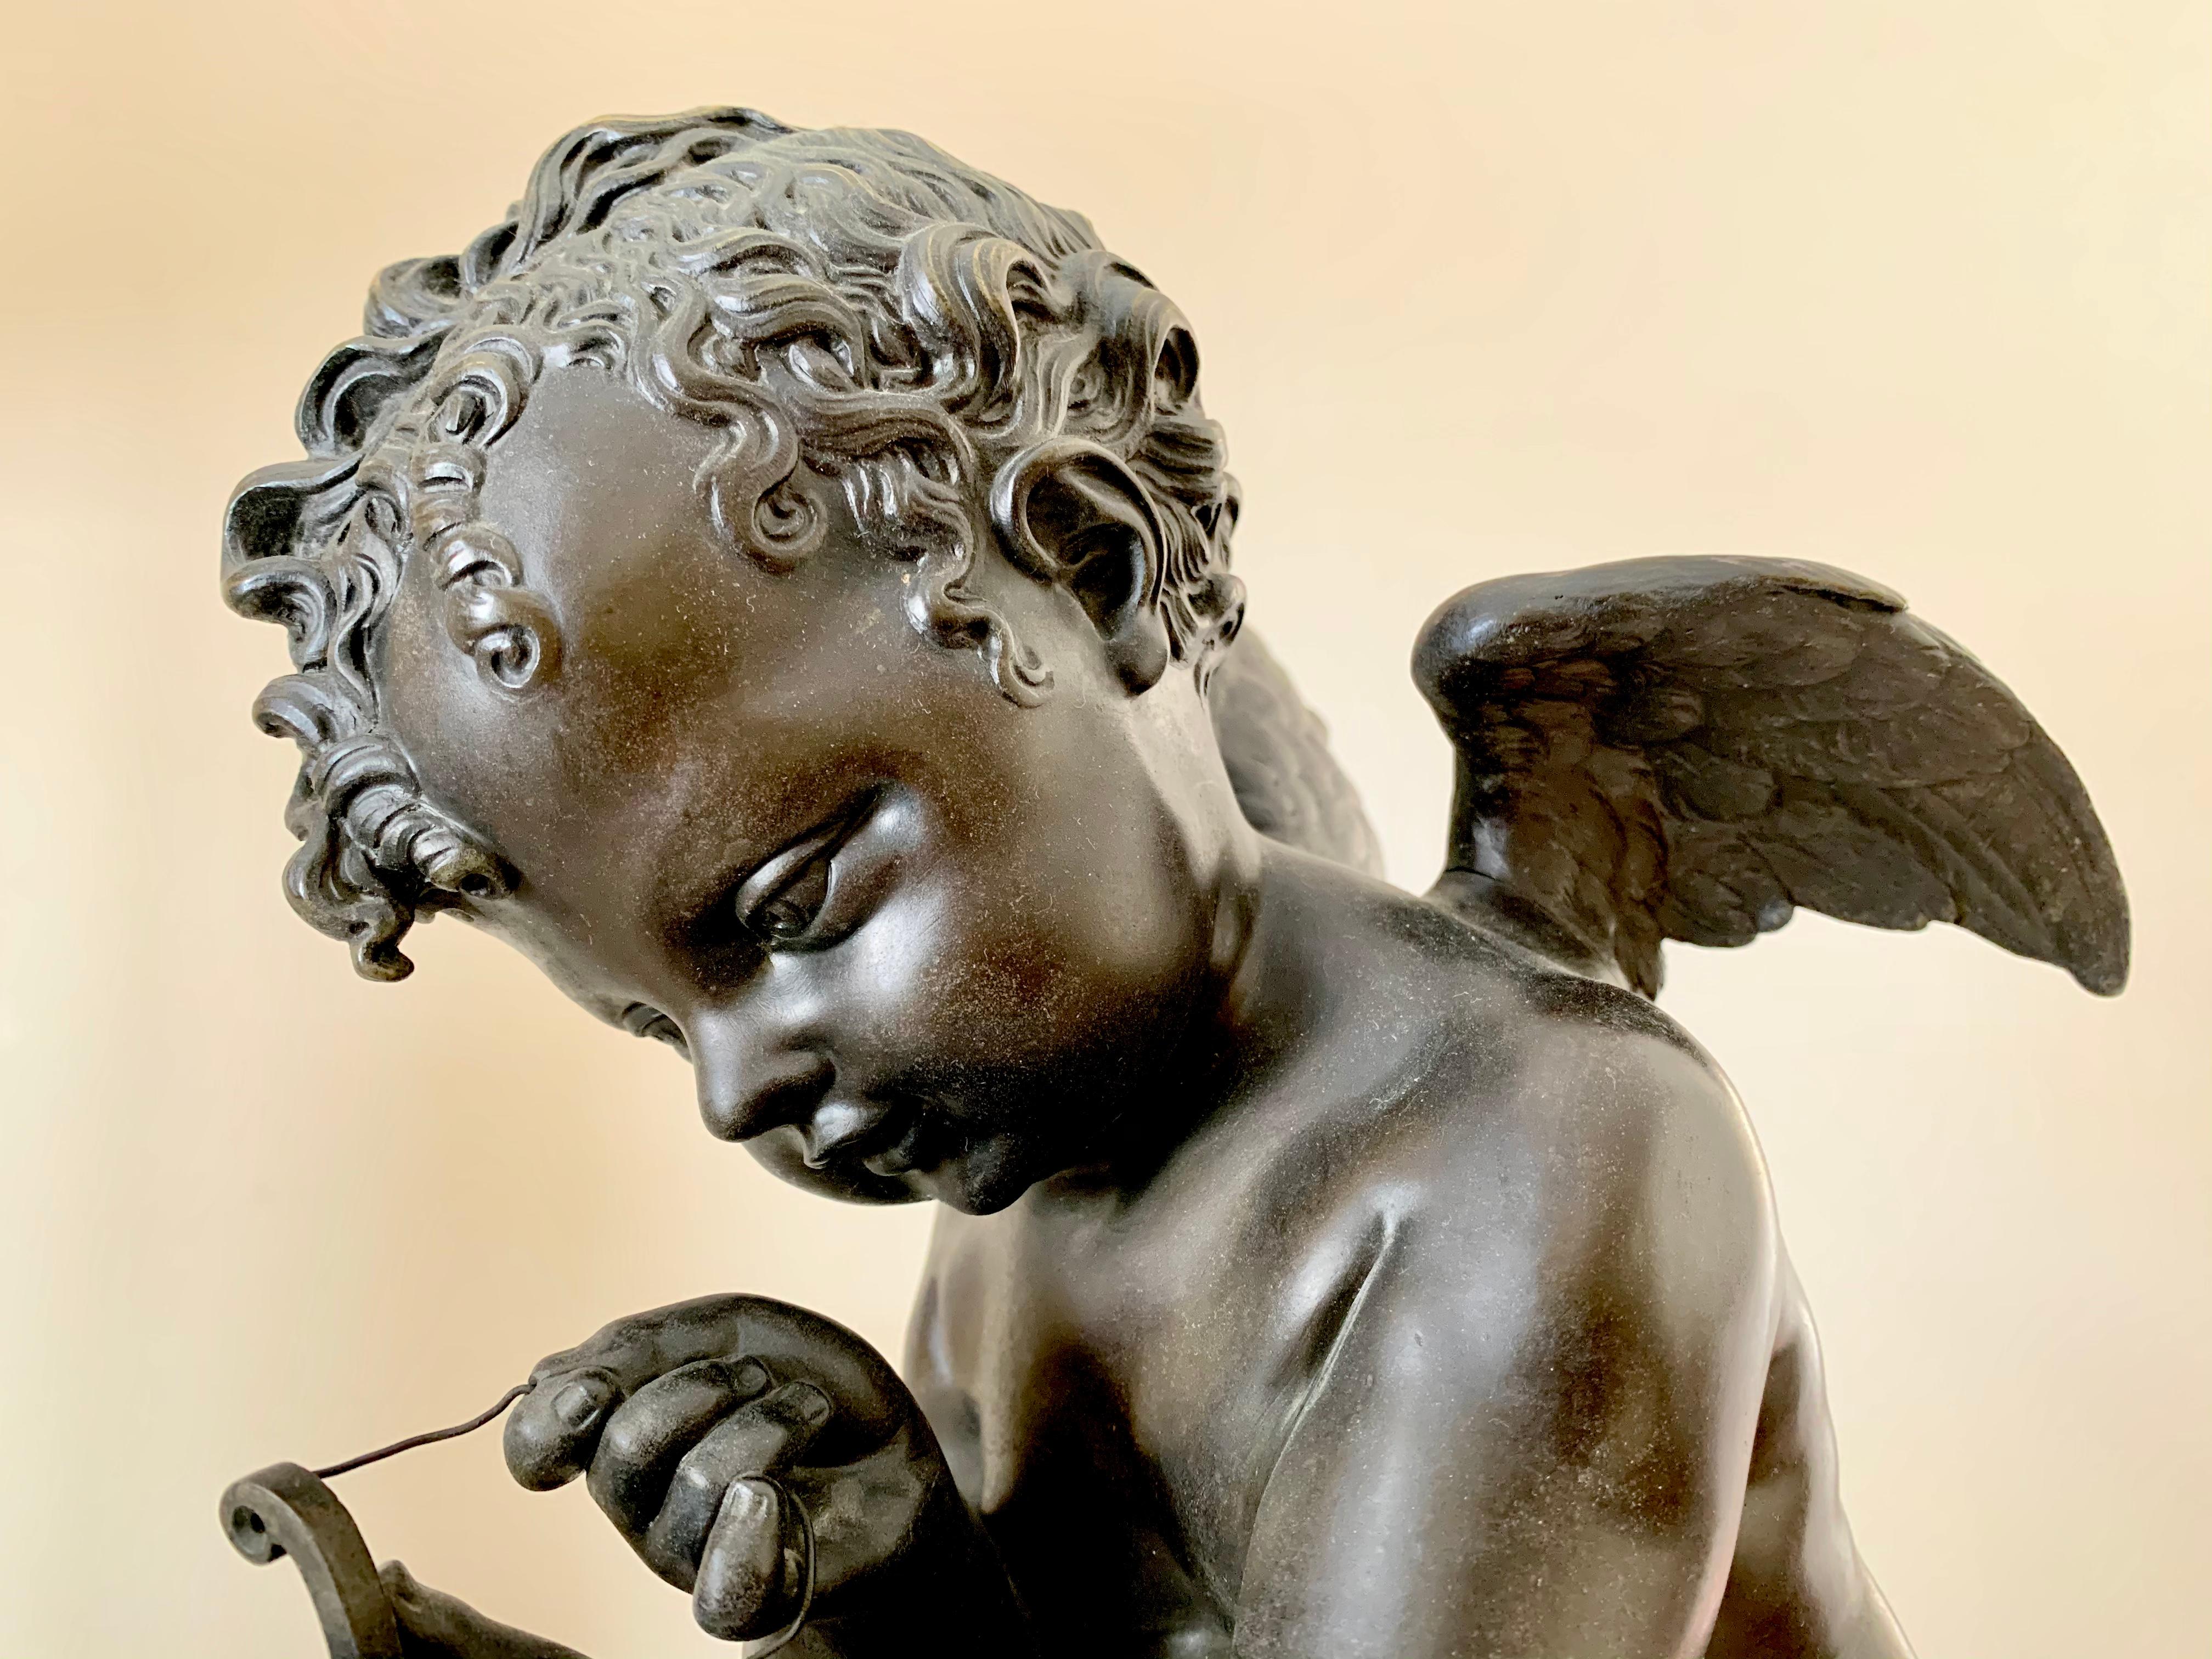 Beautiful antique bronze of cupid stringing his bow signed Lemire. Charles Gabriel Sauvage (1741-1827), called Lemire pere, was a noted French sculptor who worked in bronze as well as porcelain. His figural group of Louis XVI and Benjamin Franklin